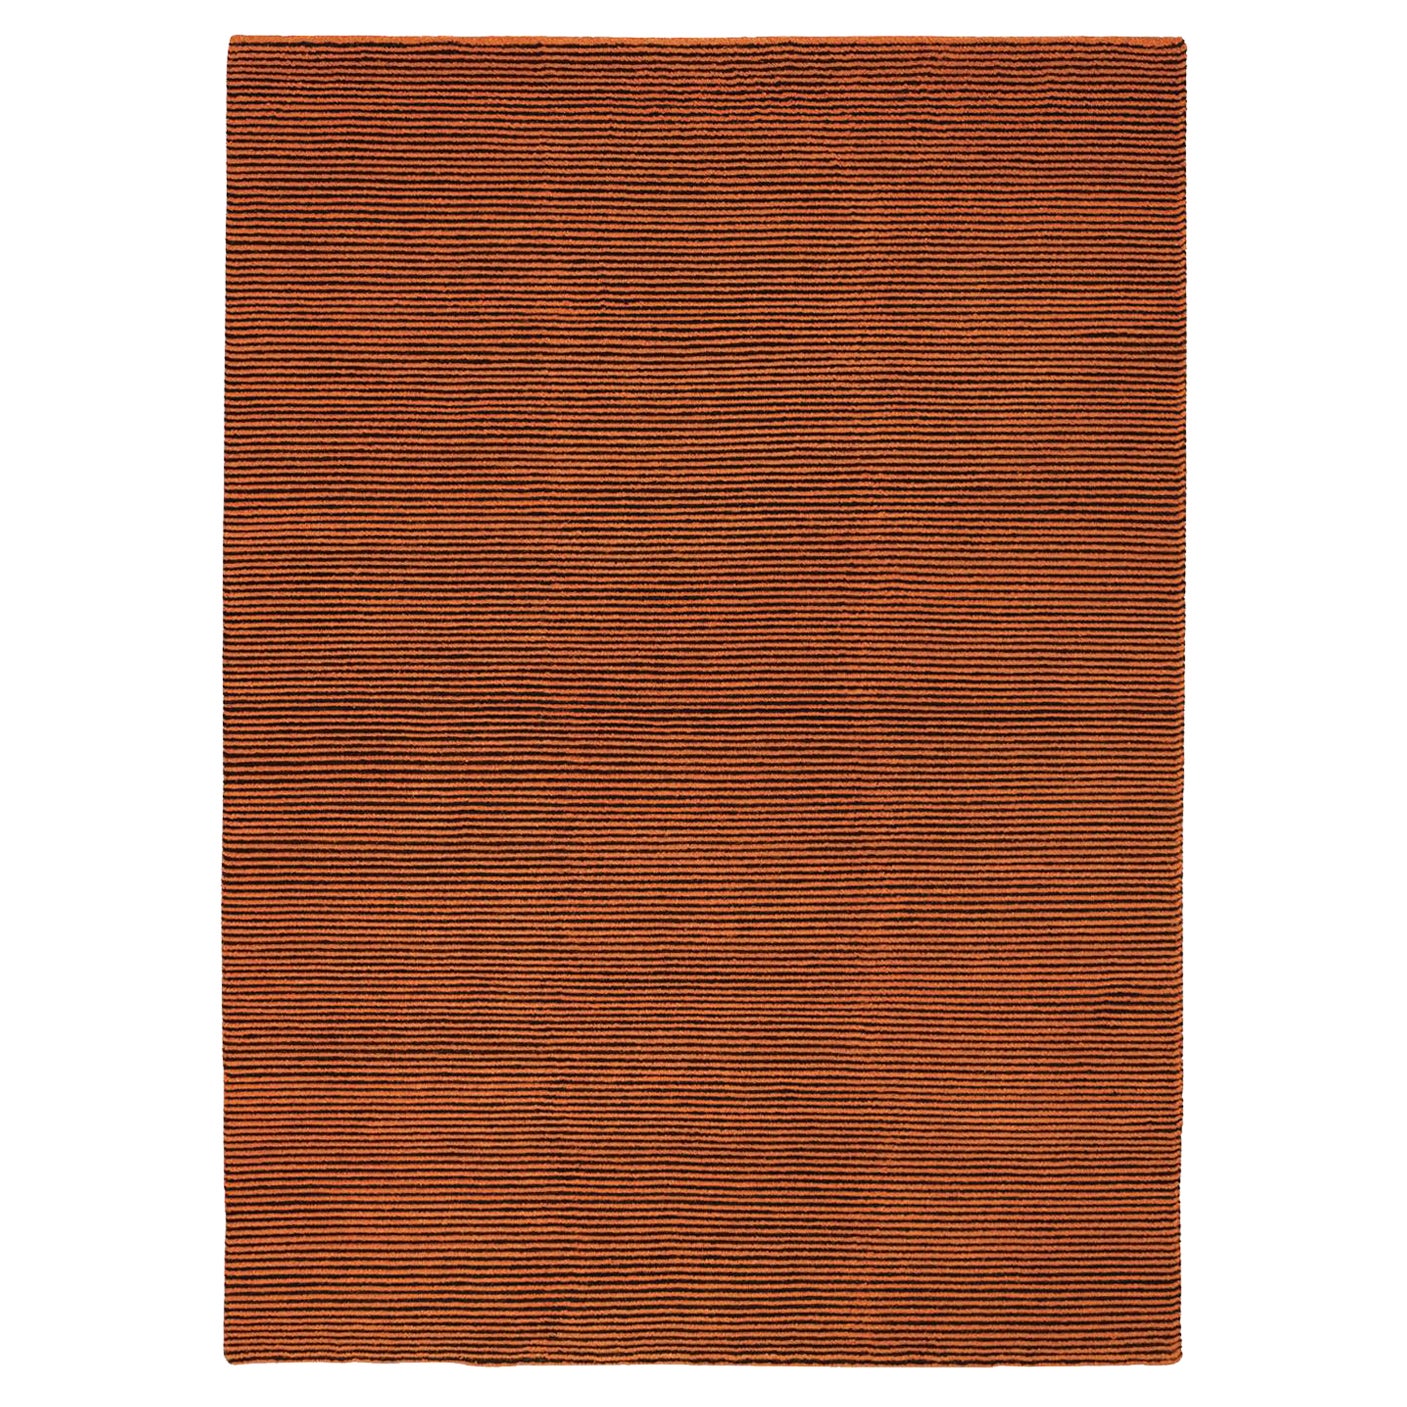 Contemporary Soft Orange Pure Wool Rug by Deanna Comellini In Stock 170x240 cm For Sale